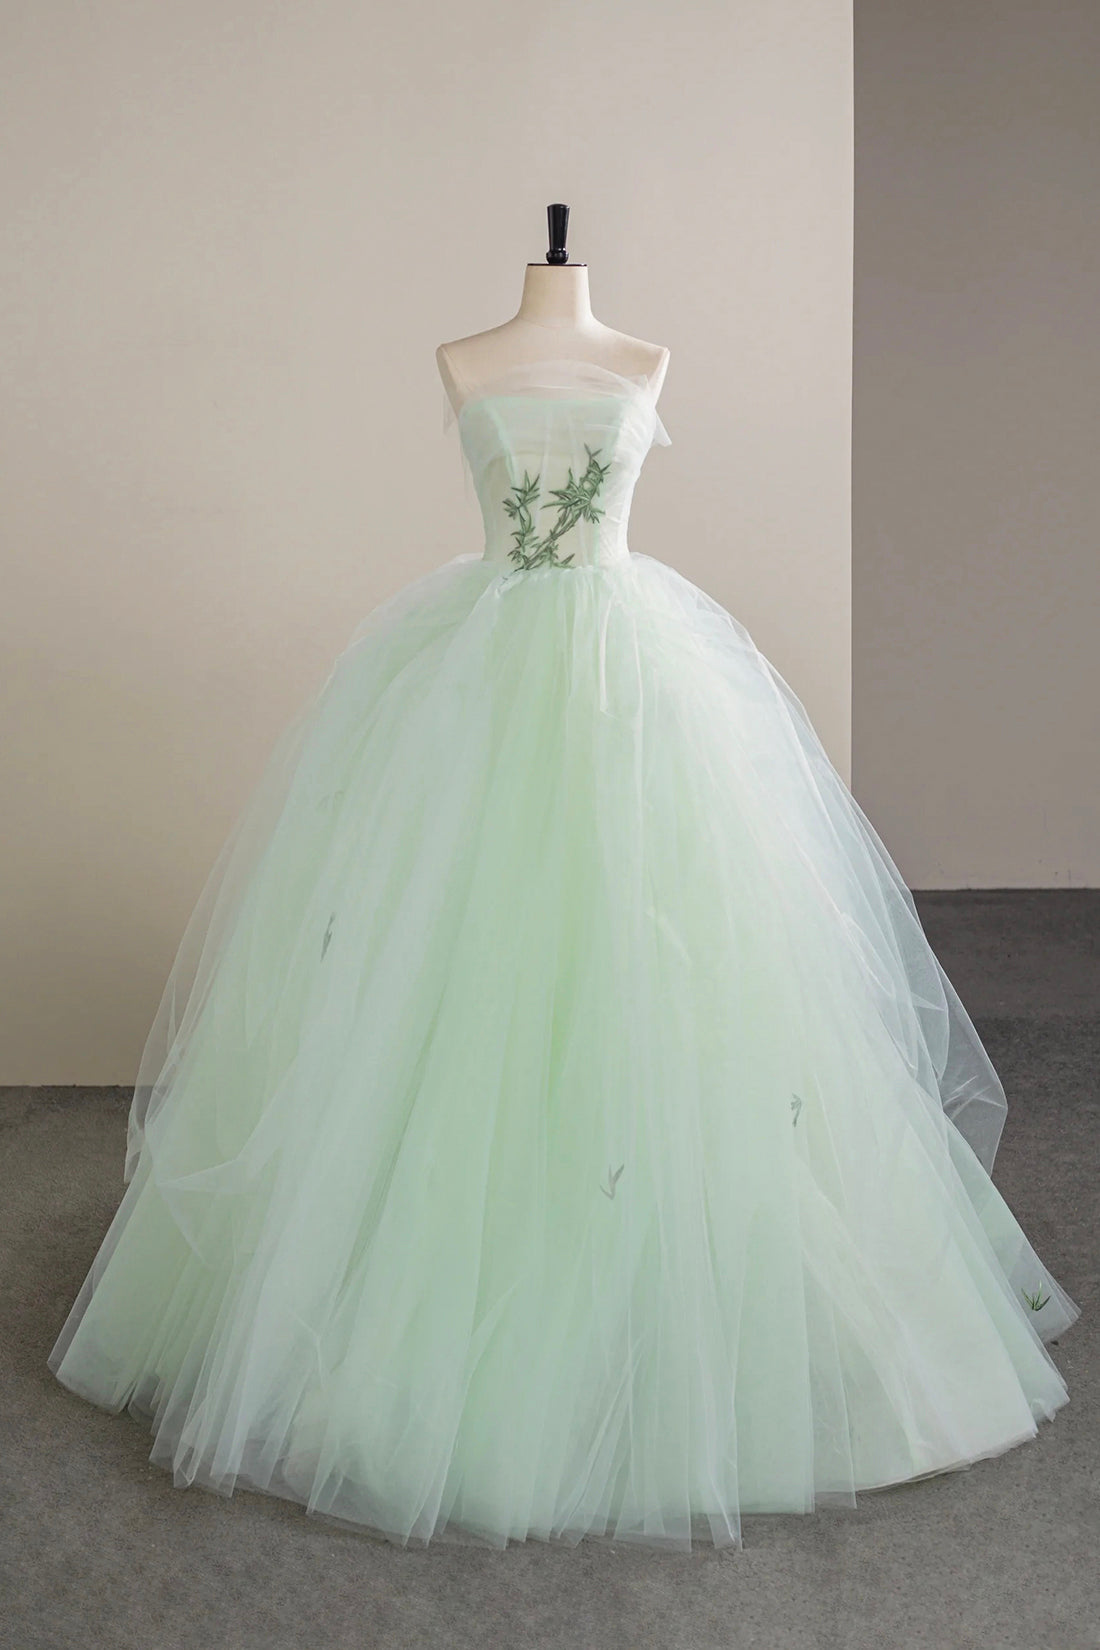 Lovely Sweetheart Neckline Tulle Long Prom Dress with Lace, Green Strapless Evening Dress